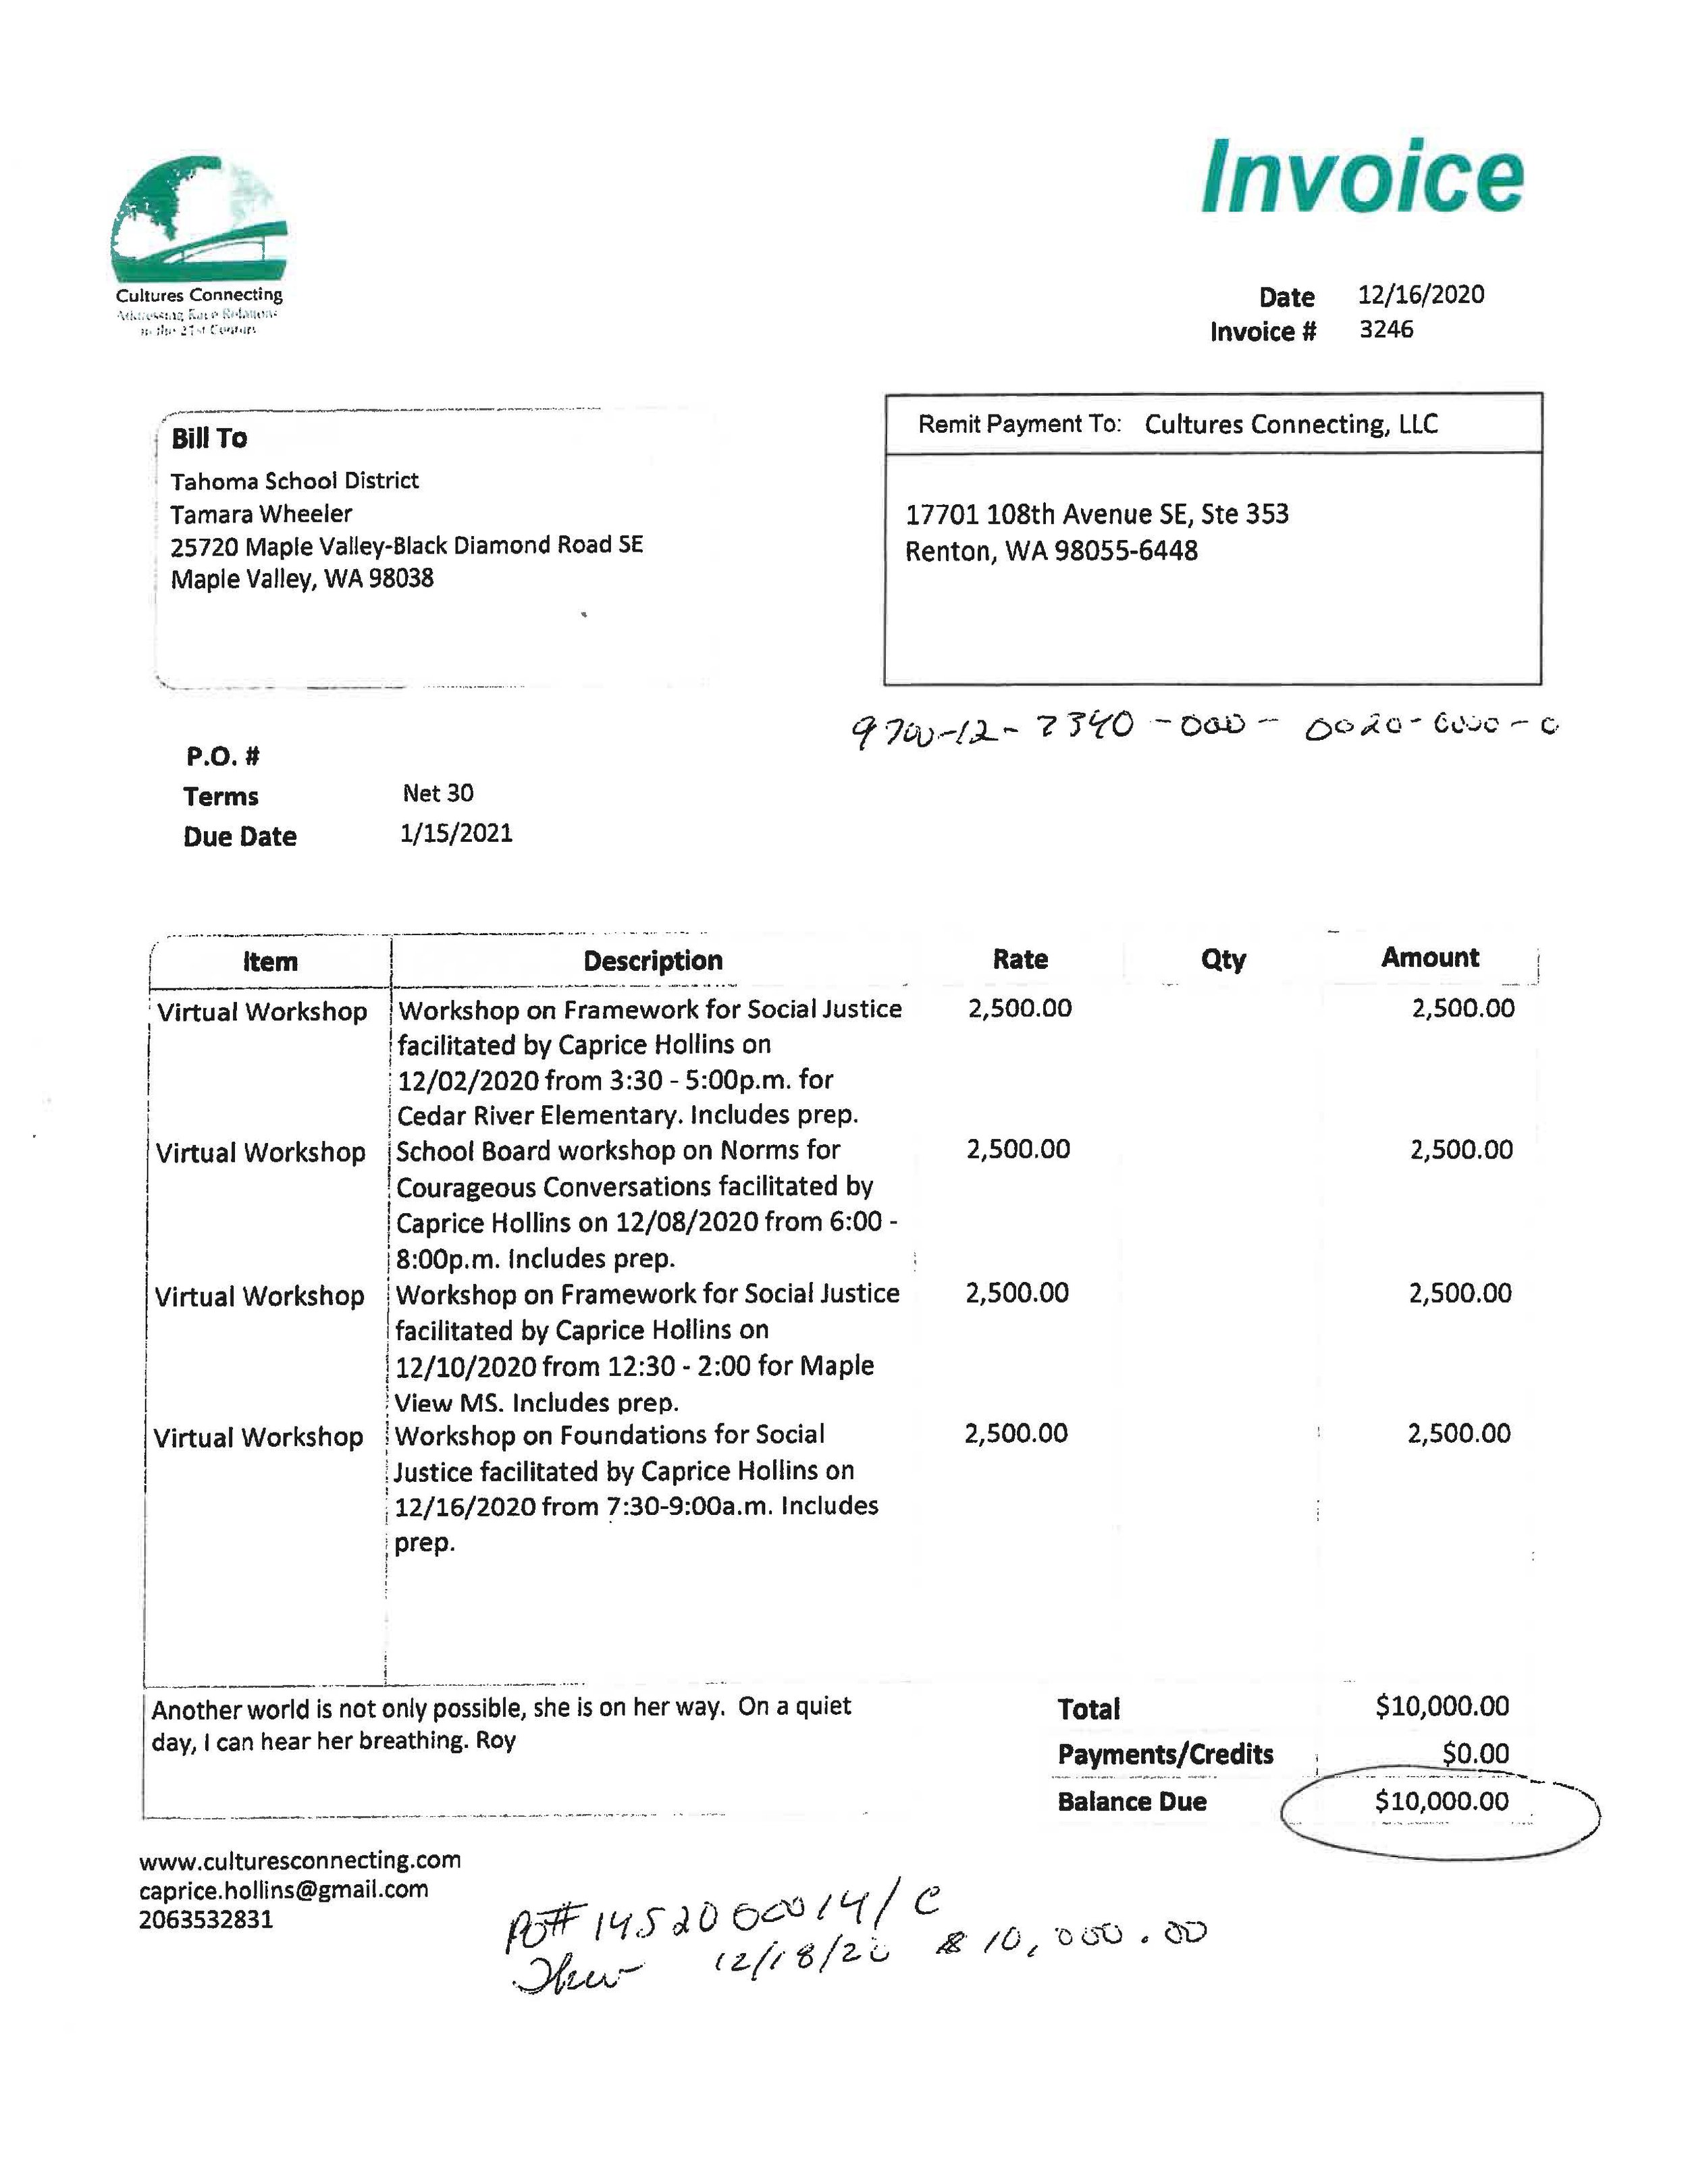 CH invoices_Page_05.jpg